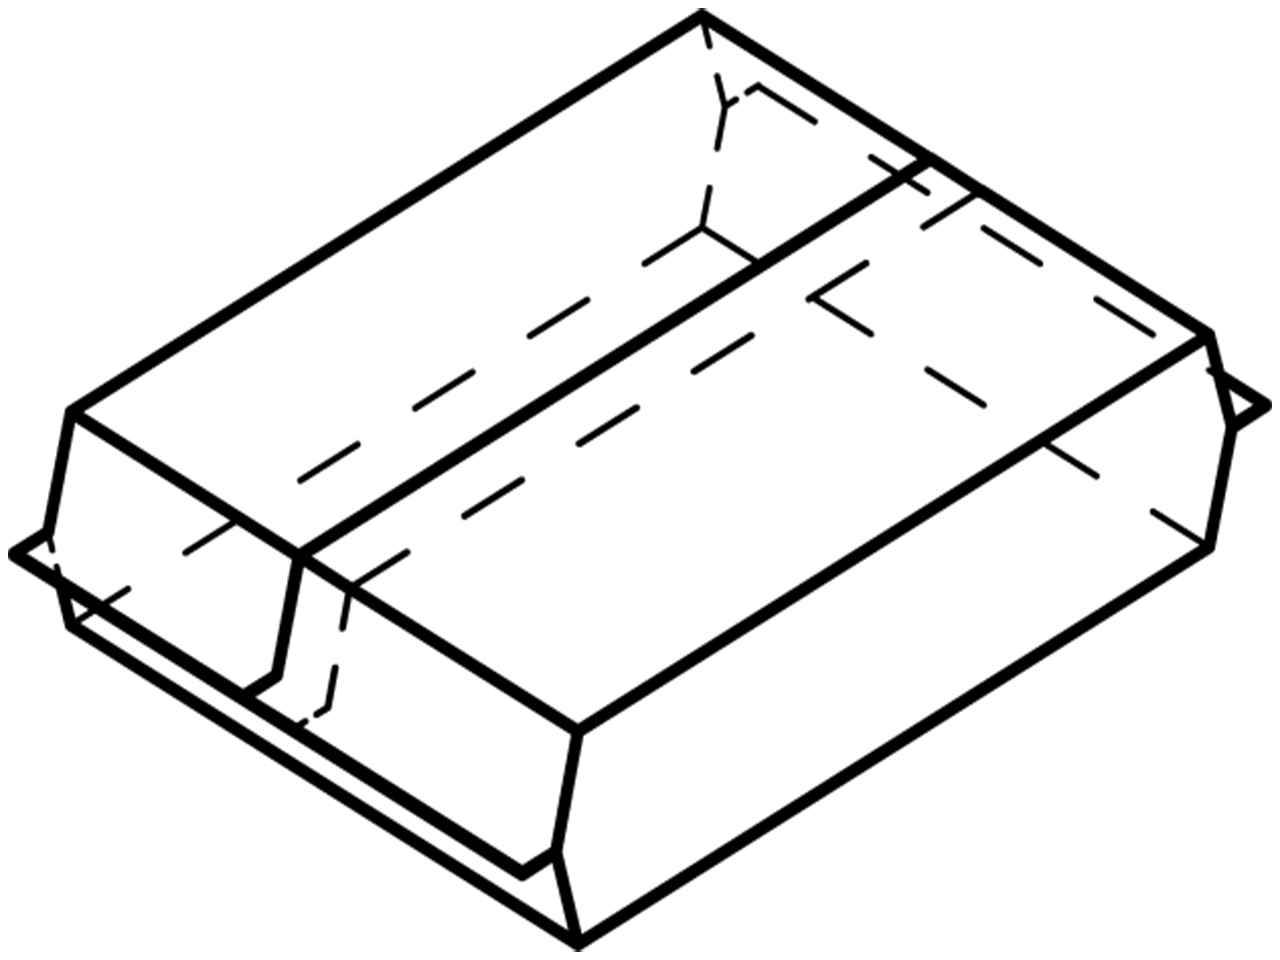 Illustration of the packaging type "two sides sewn, top overlap glued